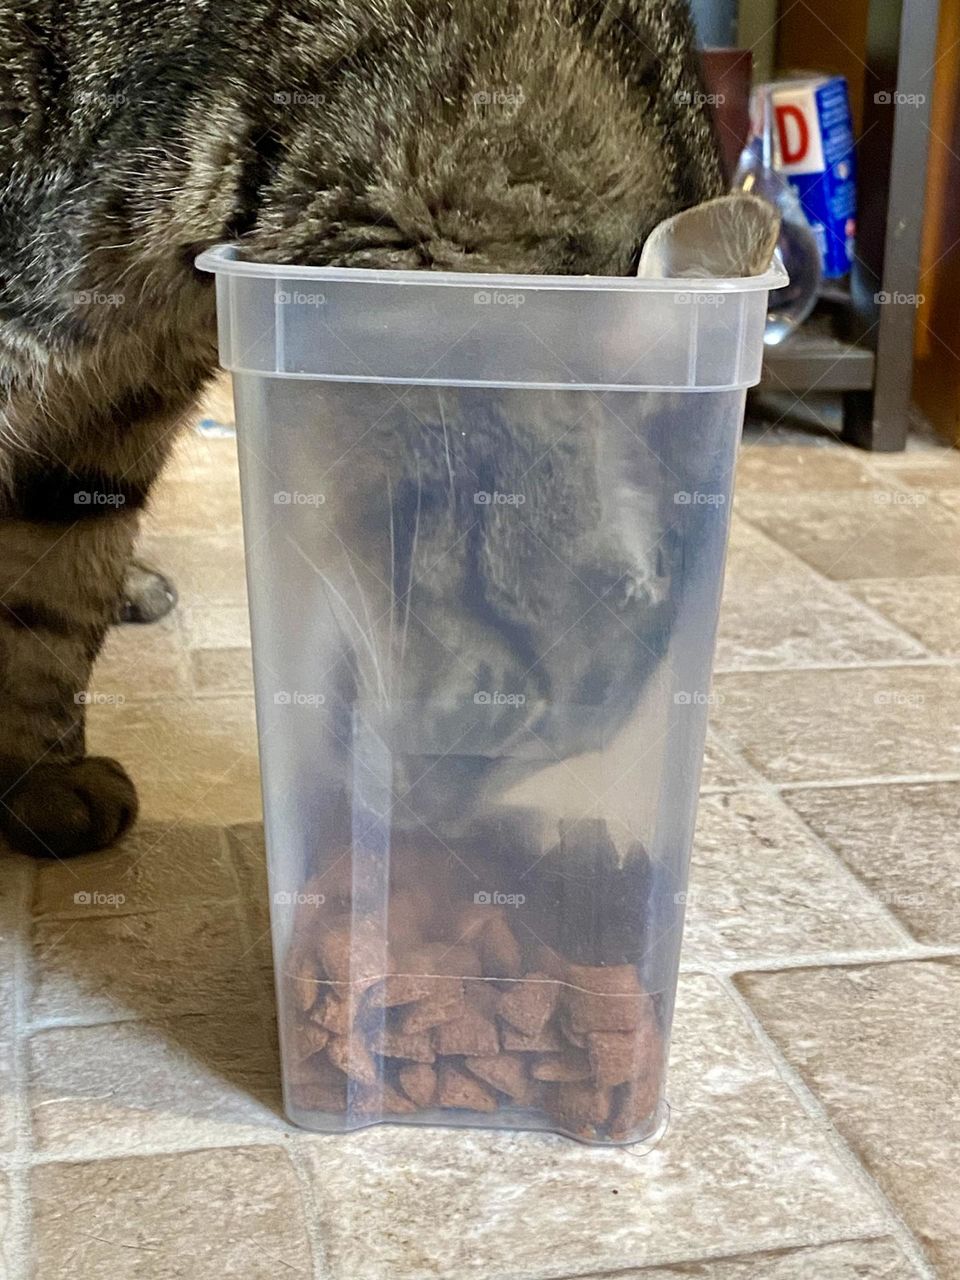 A cat stealing treats straight out of the treat container